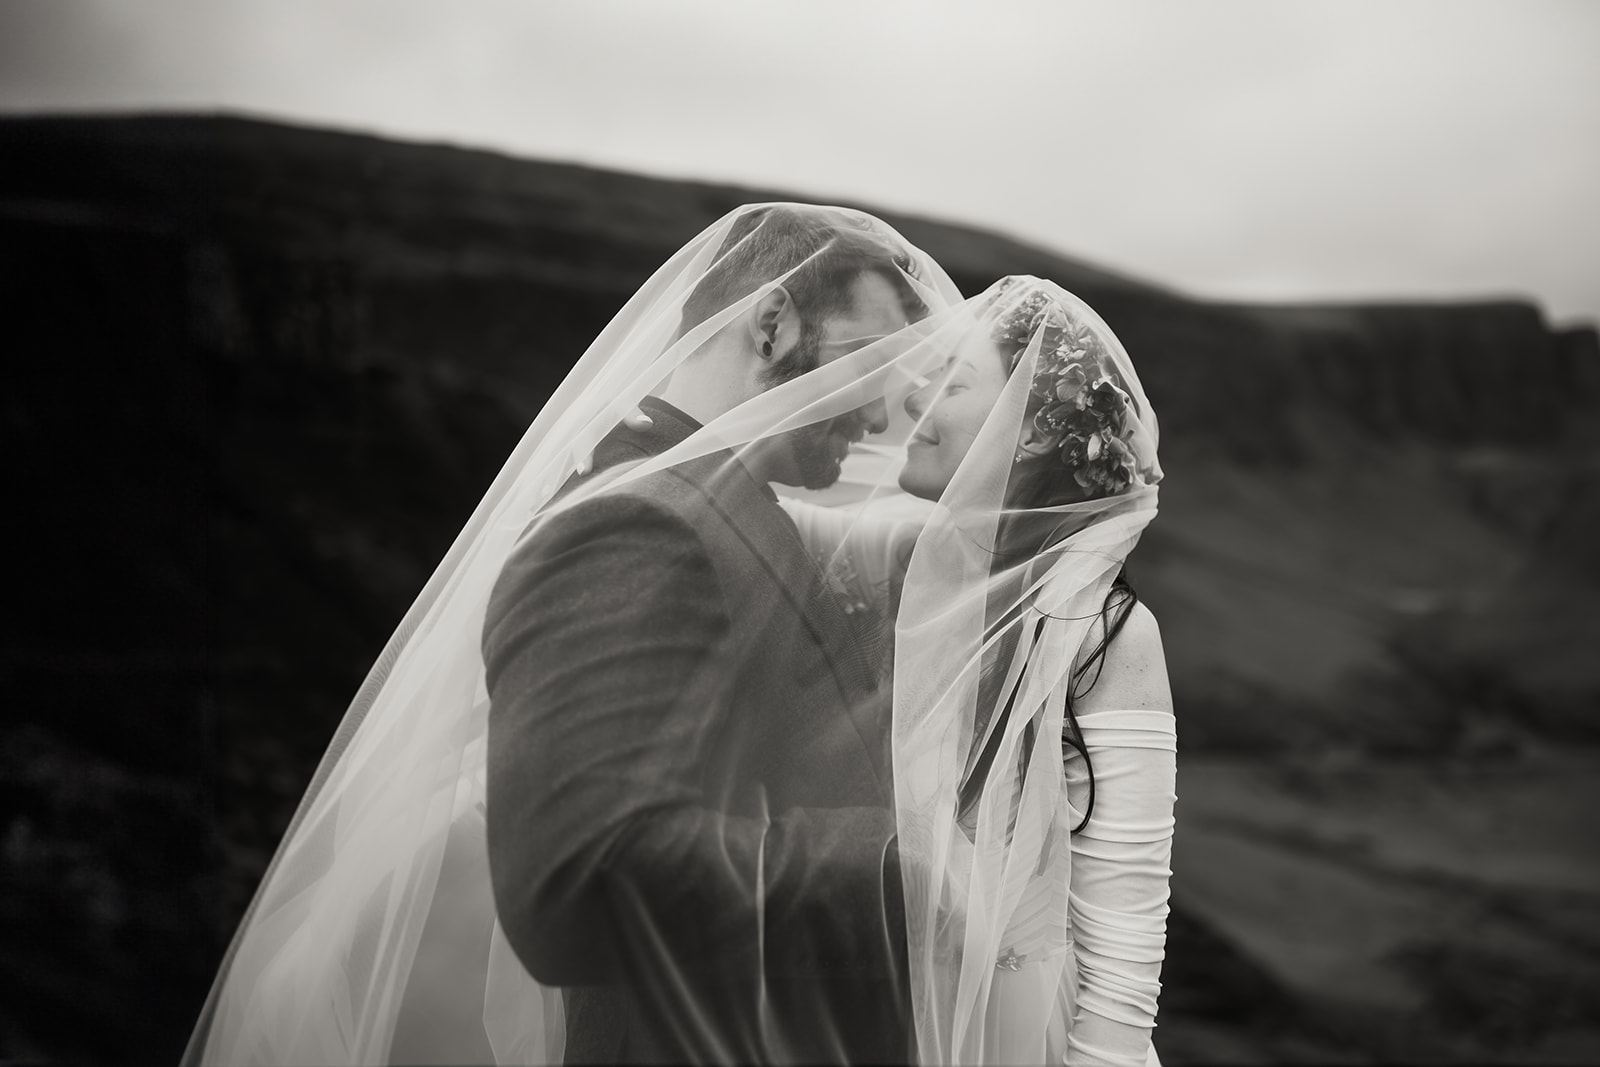 Nick and Becca, amidst the captivating Quiraing, share a moment of connection and love during their elopement photoshoot